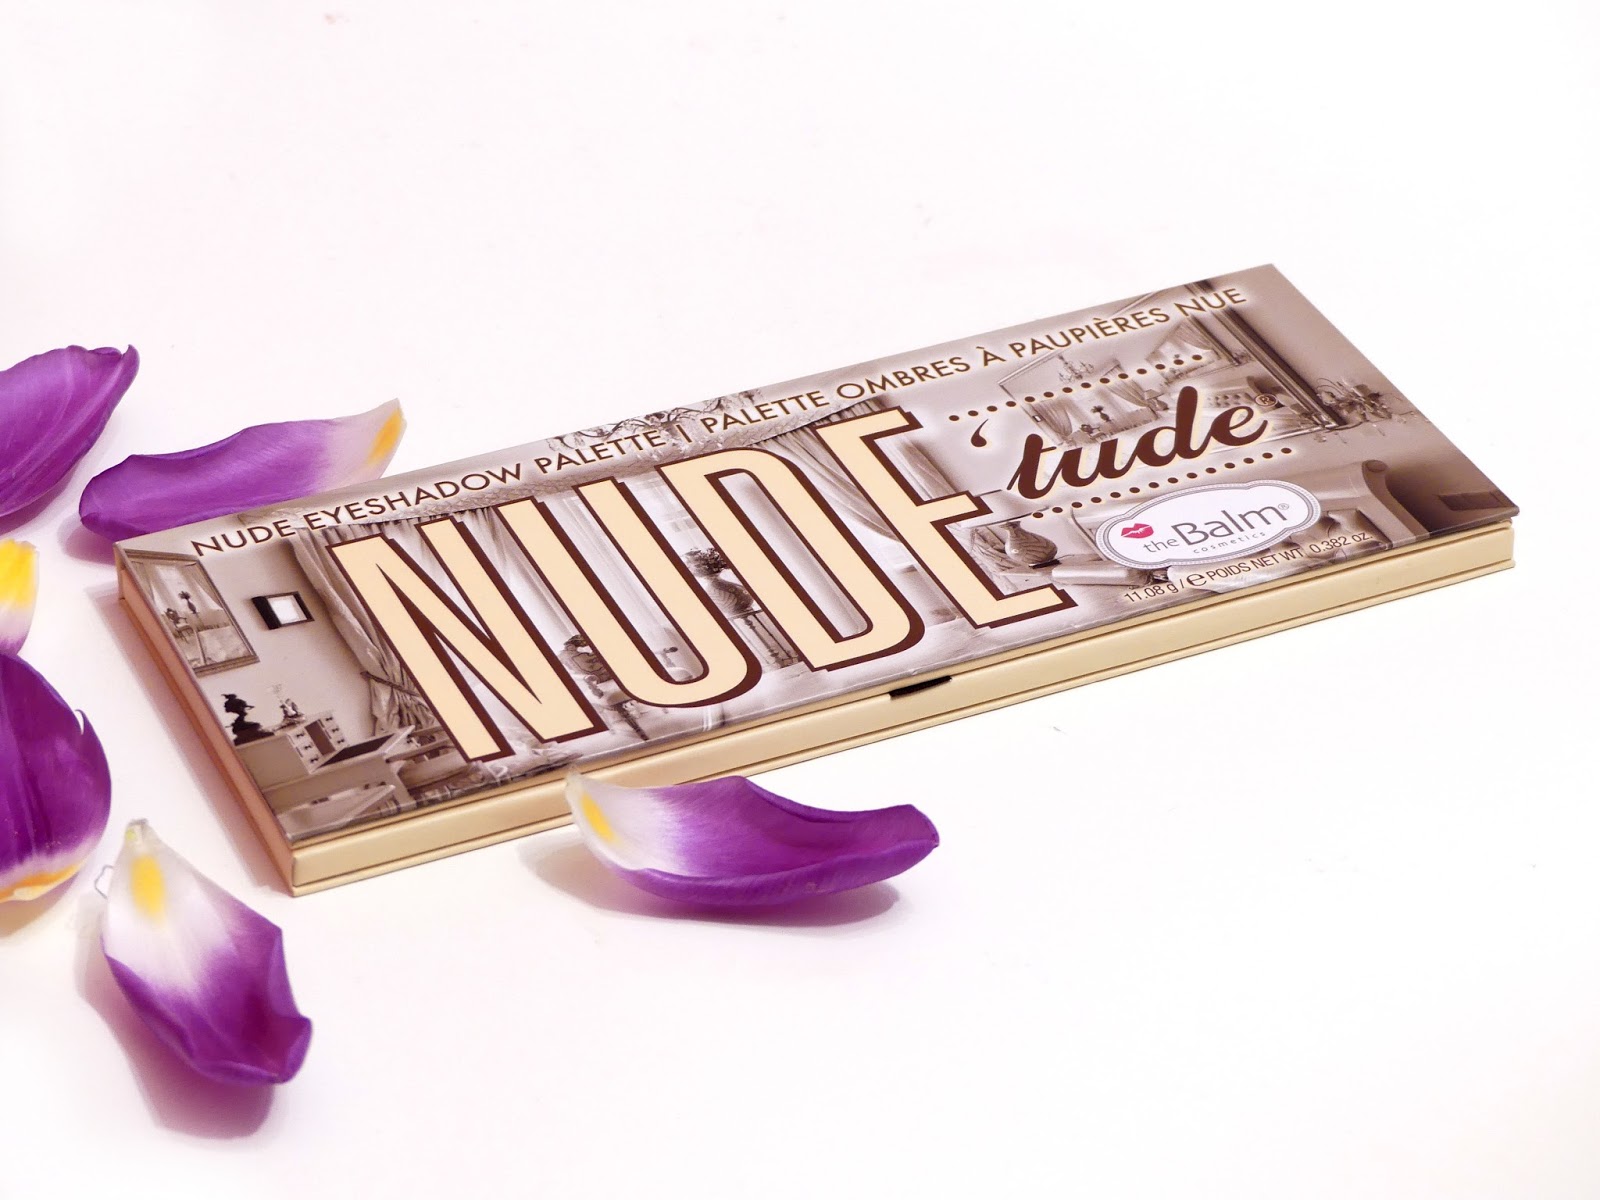 The Balm Nude ´tude Eyeshadow Palette – worth the hype?